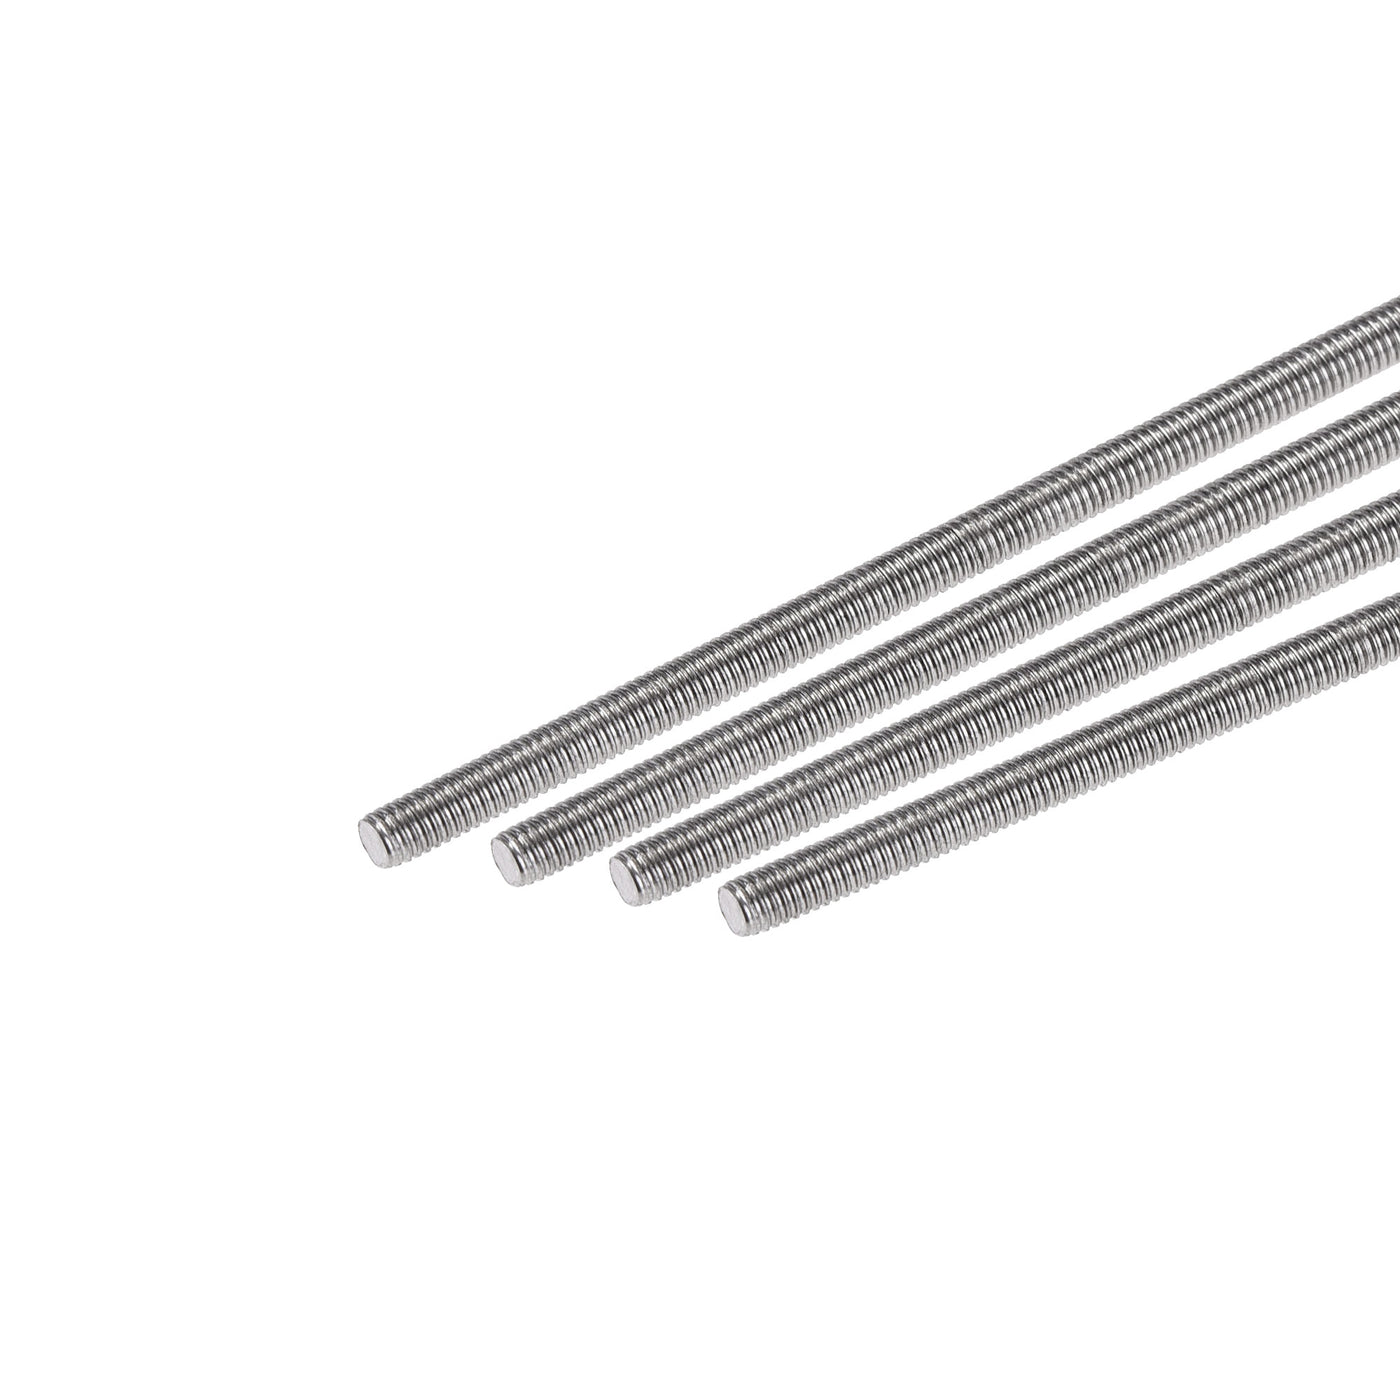 uxcell Uxcell 5Pcs M3 x 350mm Fully Threaded Rod 304 Stainless Steel Right Hand Threads